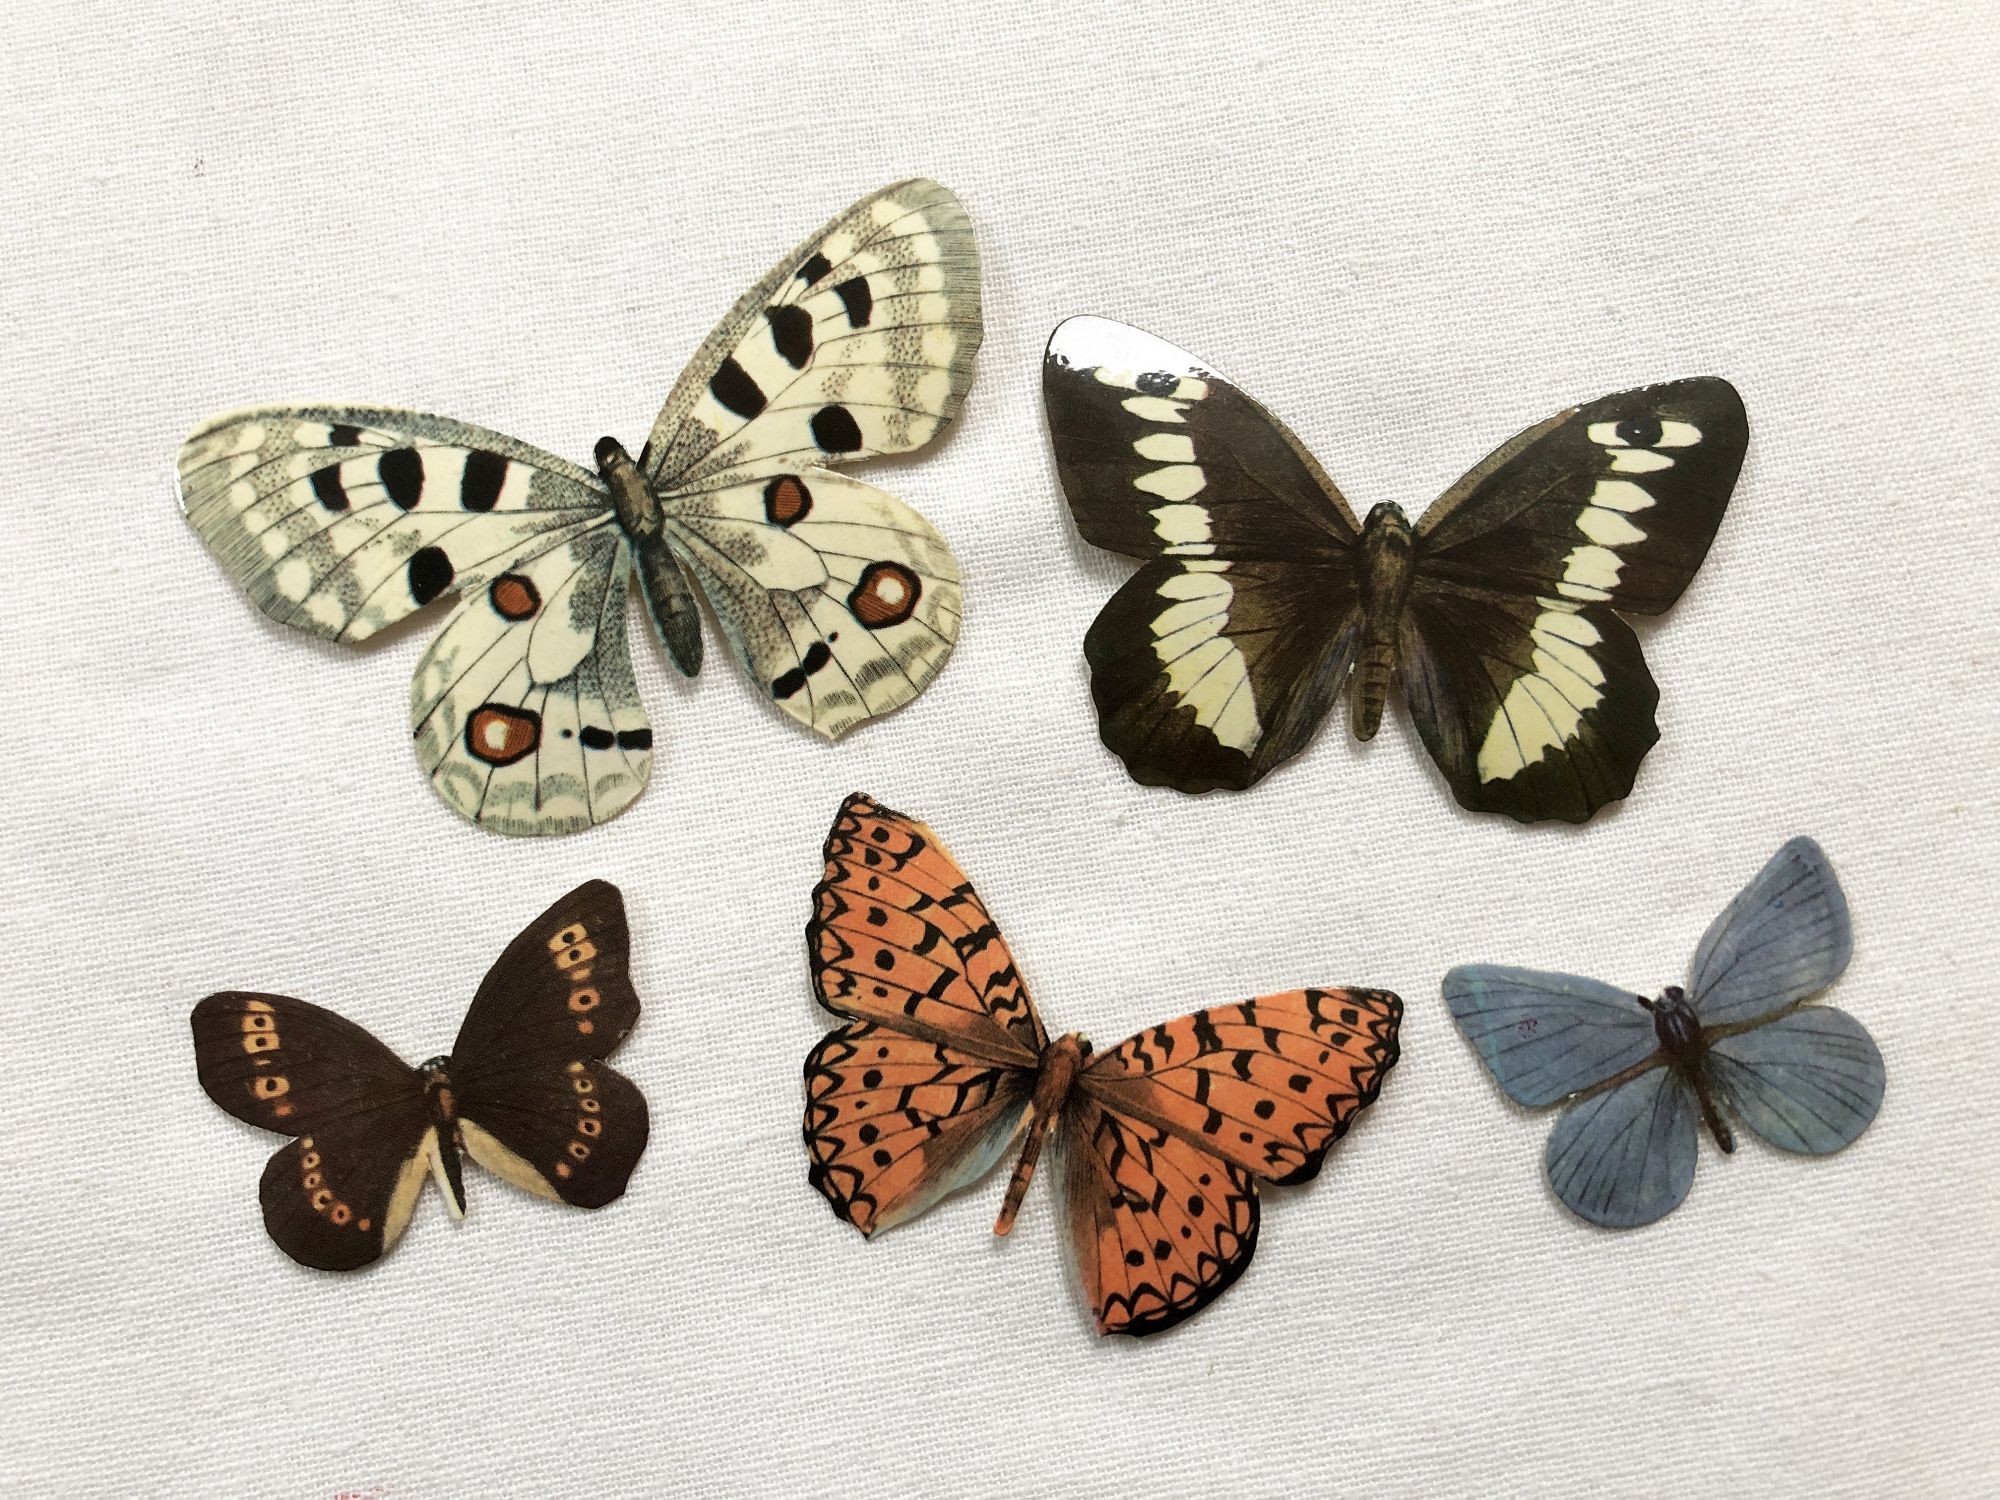 Set of 5 sticky advertising butterflies from a French biscuit company in the 1960s